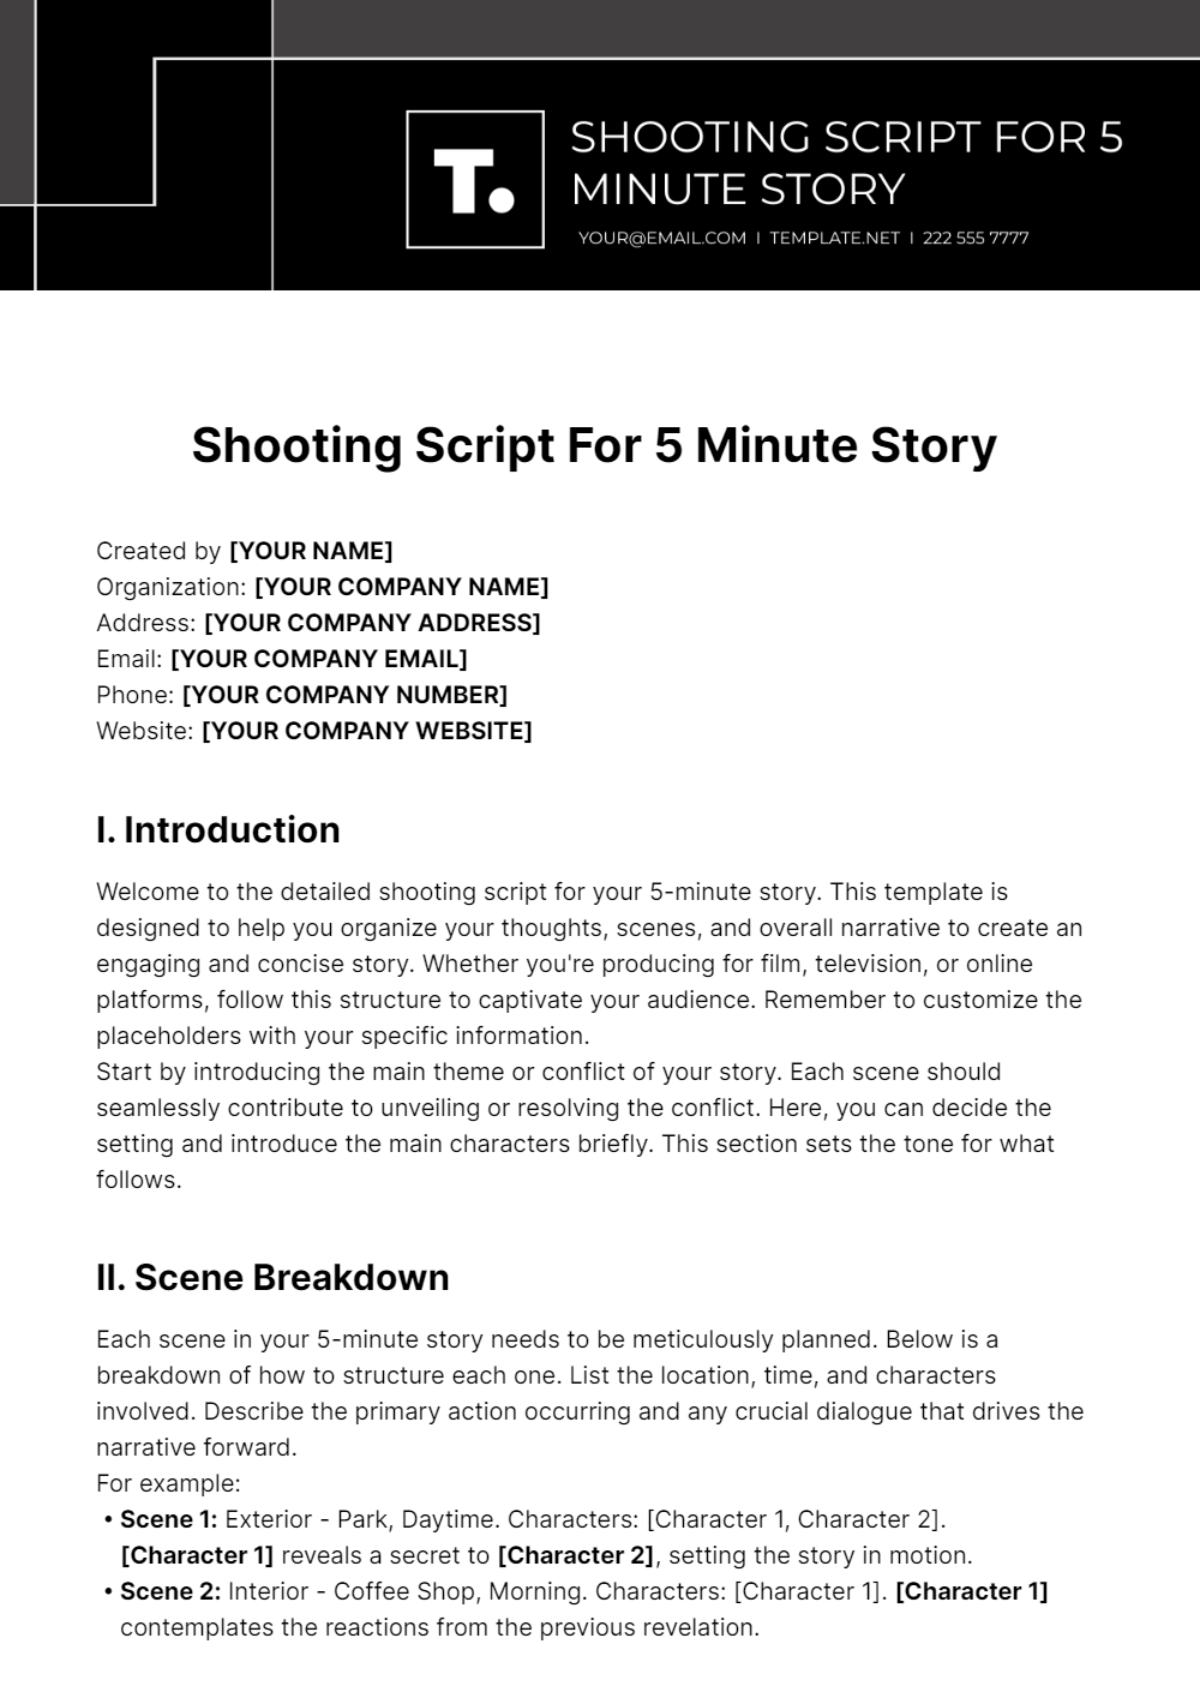 Shooting Script For 5 Minute Story Template